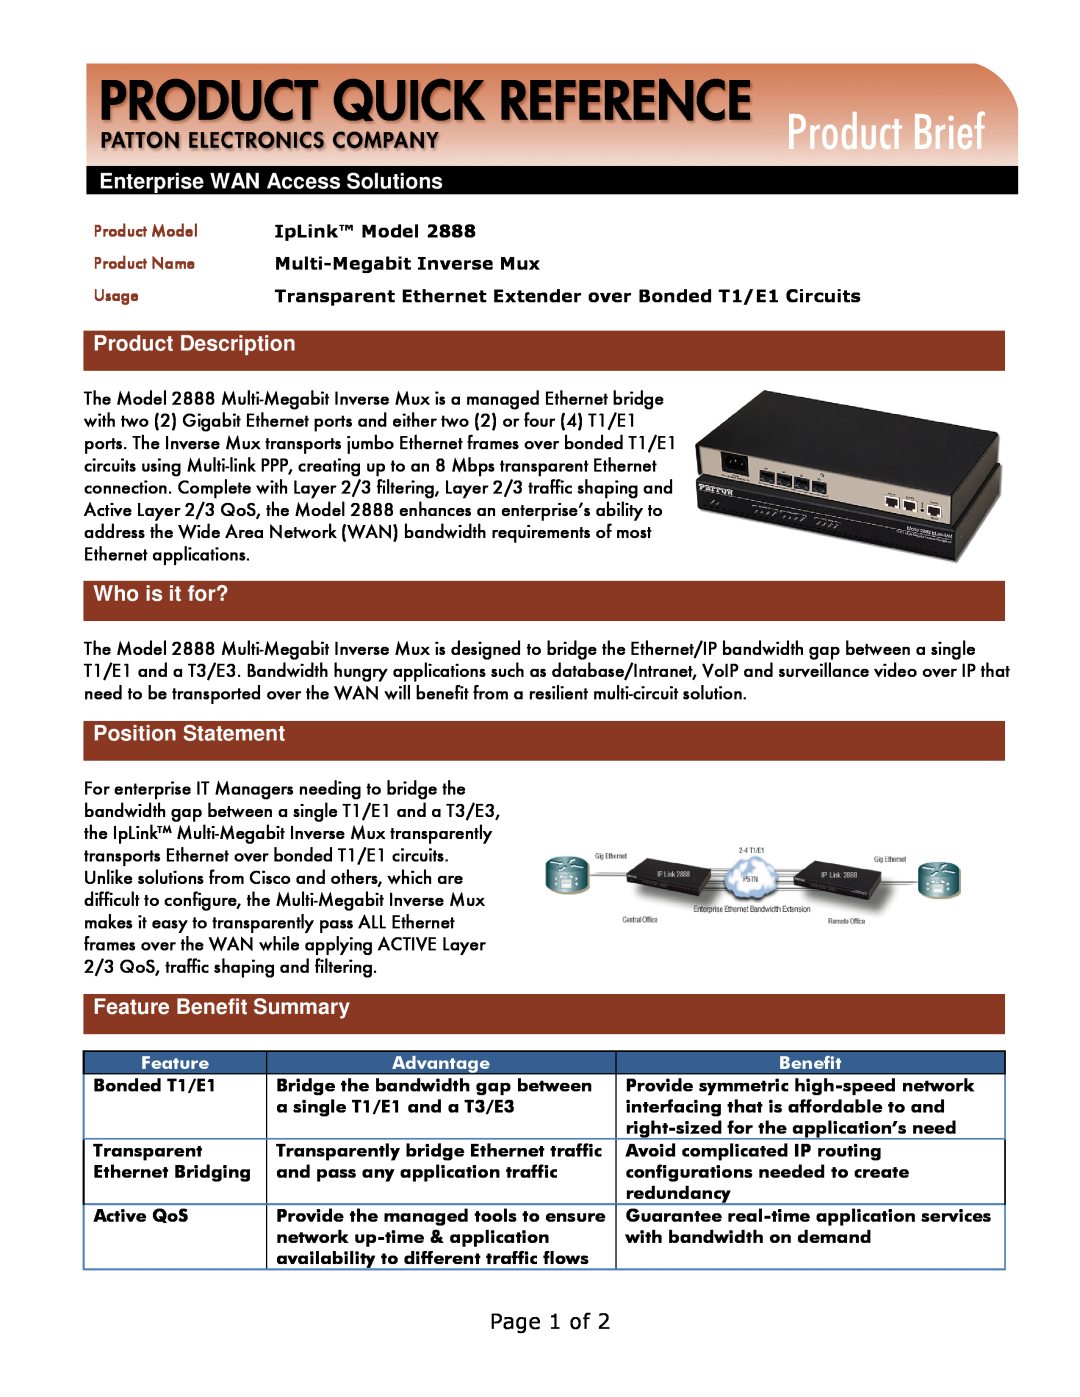 Patton electronic 2888 manual Product Brief, Enterprise WAN Access Solutions, Product Description, Who is it for? 